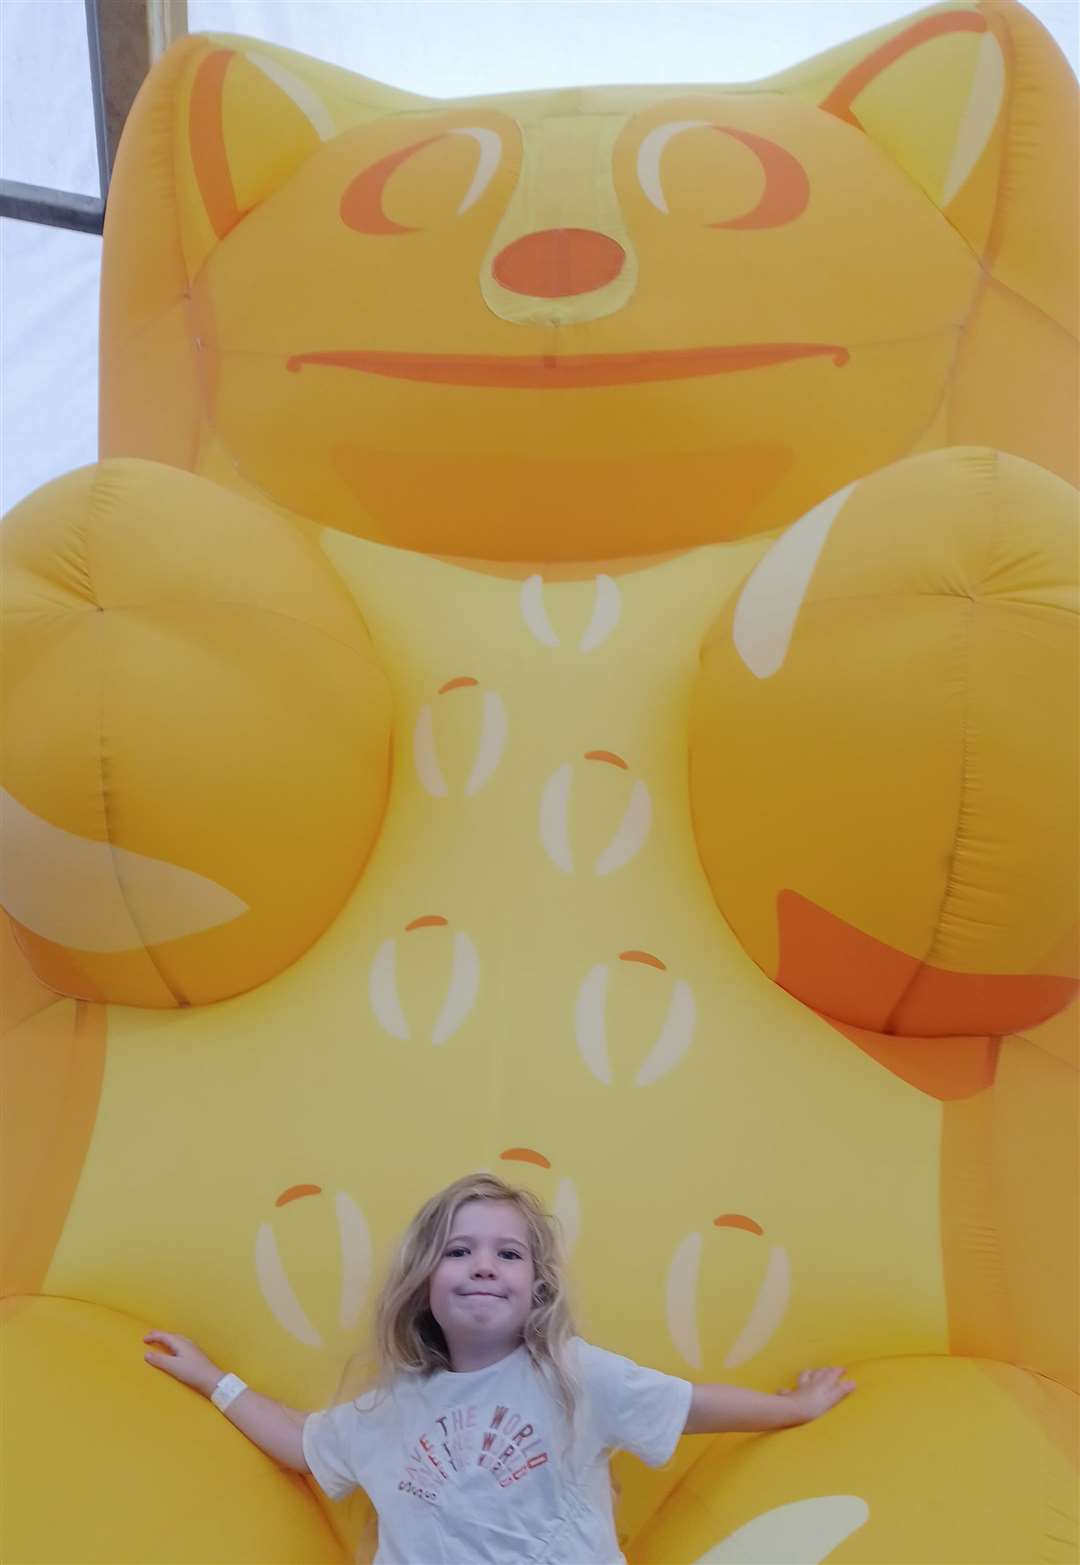 A quick bounce on the giant gummy bear while we were waiting